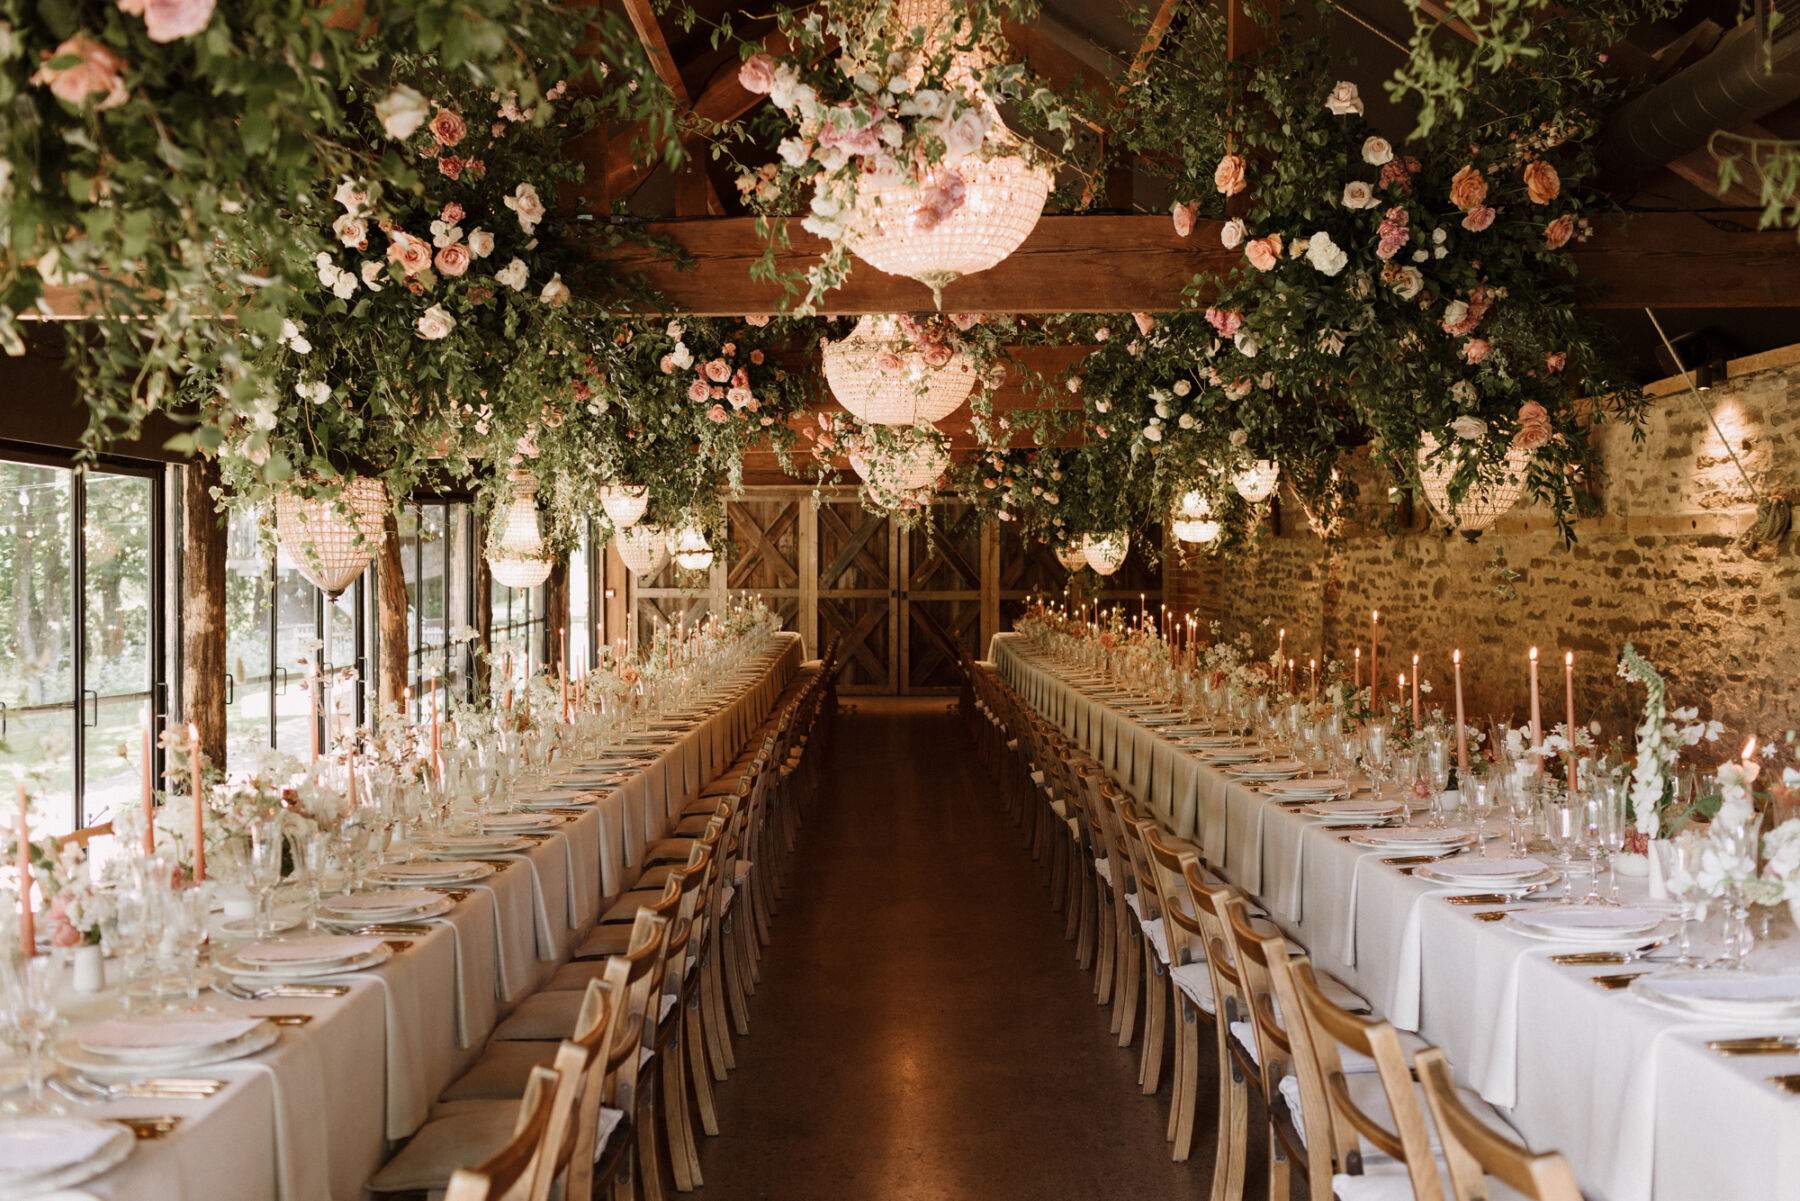 Inside the barn at Dewsall Court, country house wedding venue in Herefordshire. Trestle tables and taper candles with hanging greenery and chandeliers hanging above the tables.